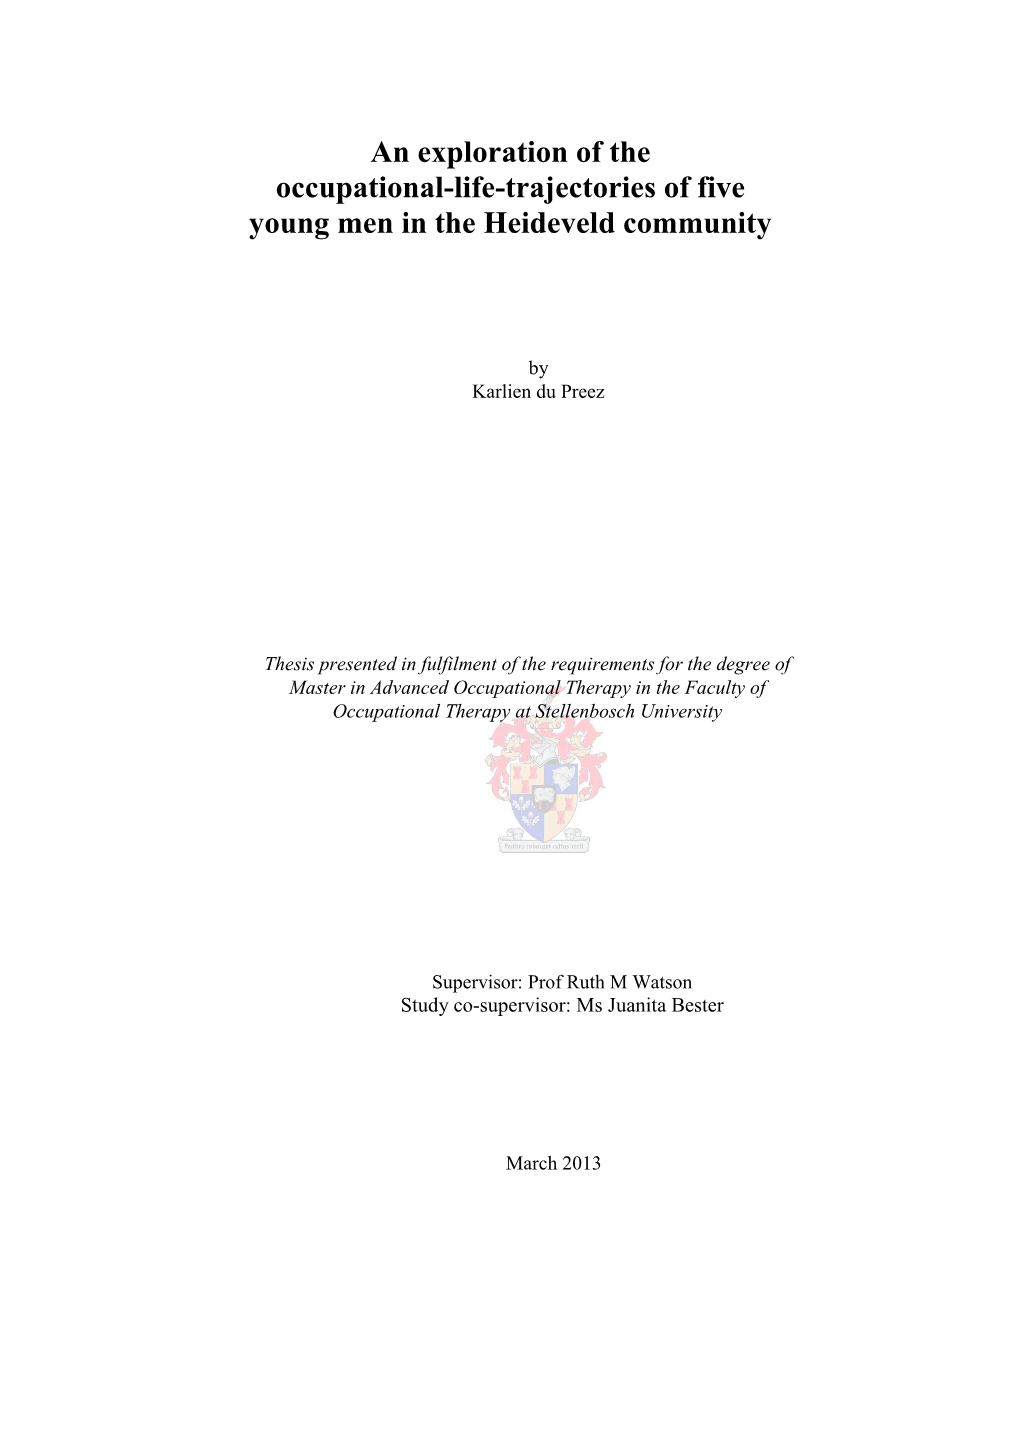 An Exploration of the Occupational-Life-Trajectories of Five Young Men in the Heideveld Community